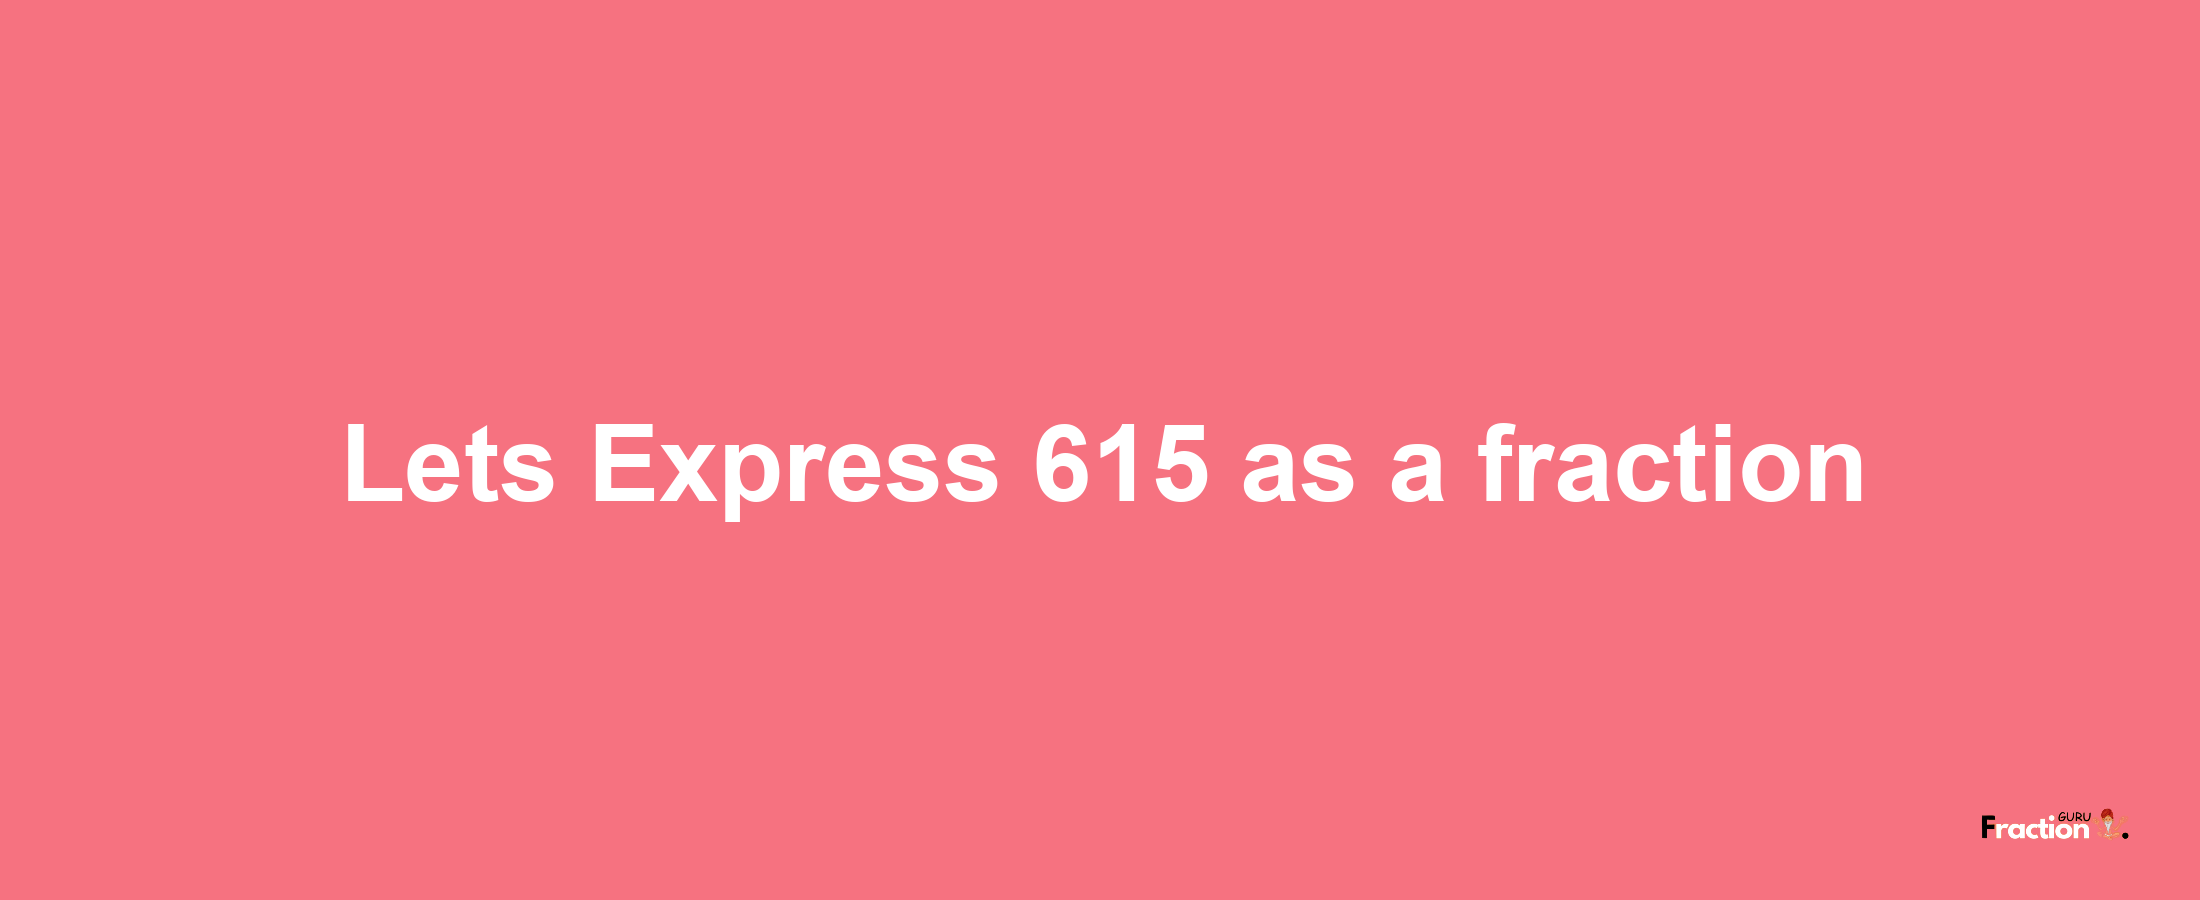 Lets Express 615 as afraction